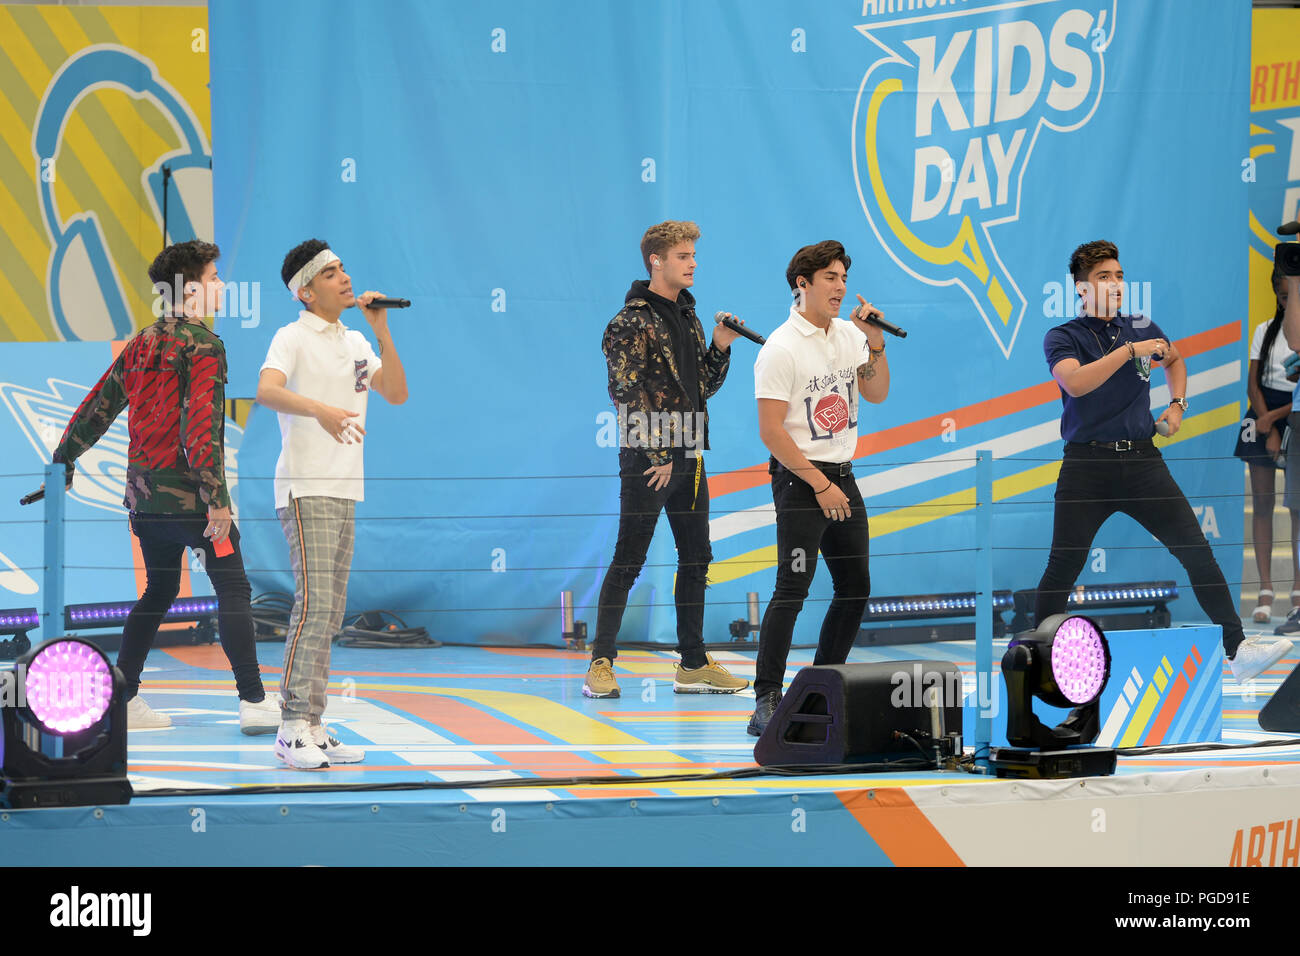 Flushing NY, USA. 25th Aug, 2018. Brady Tutton, Chance Perez, Drew Ramos, Sergio Calderon and Michael Conor of In Real Life perform Arthur Ashe Kids Day on Arthur Ashe Stadium at the USTA Billie Jean King National Tennis Center on August 25, 2018 in Flushing Queens. Credit: Mpi04/Media Punch ***No Ny Newspapers***/Alamy Live News Stock Photo